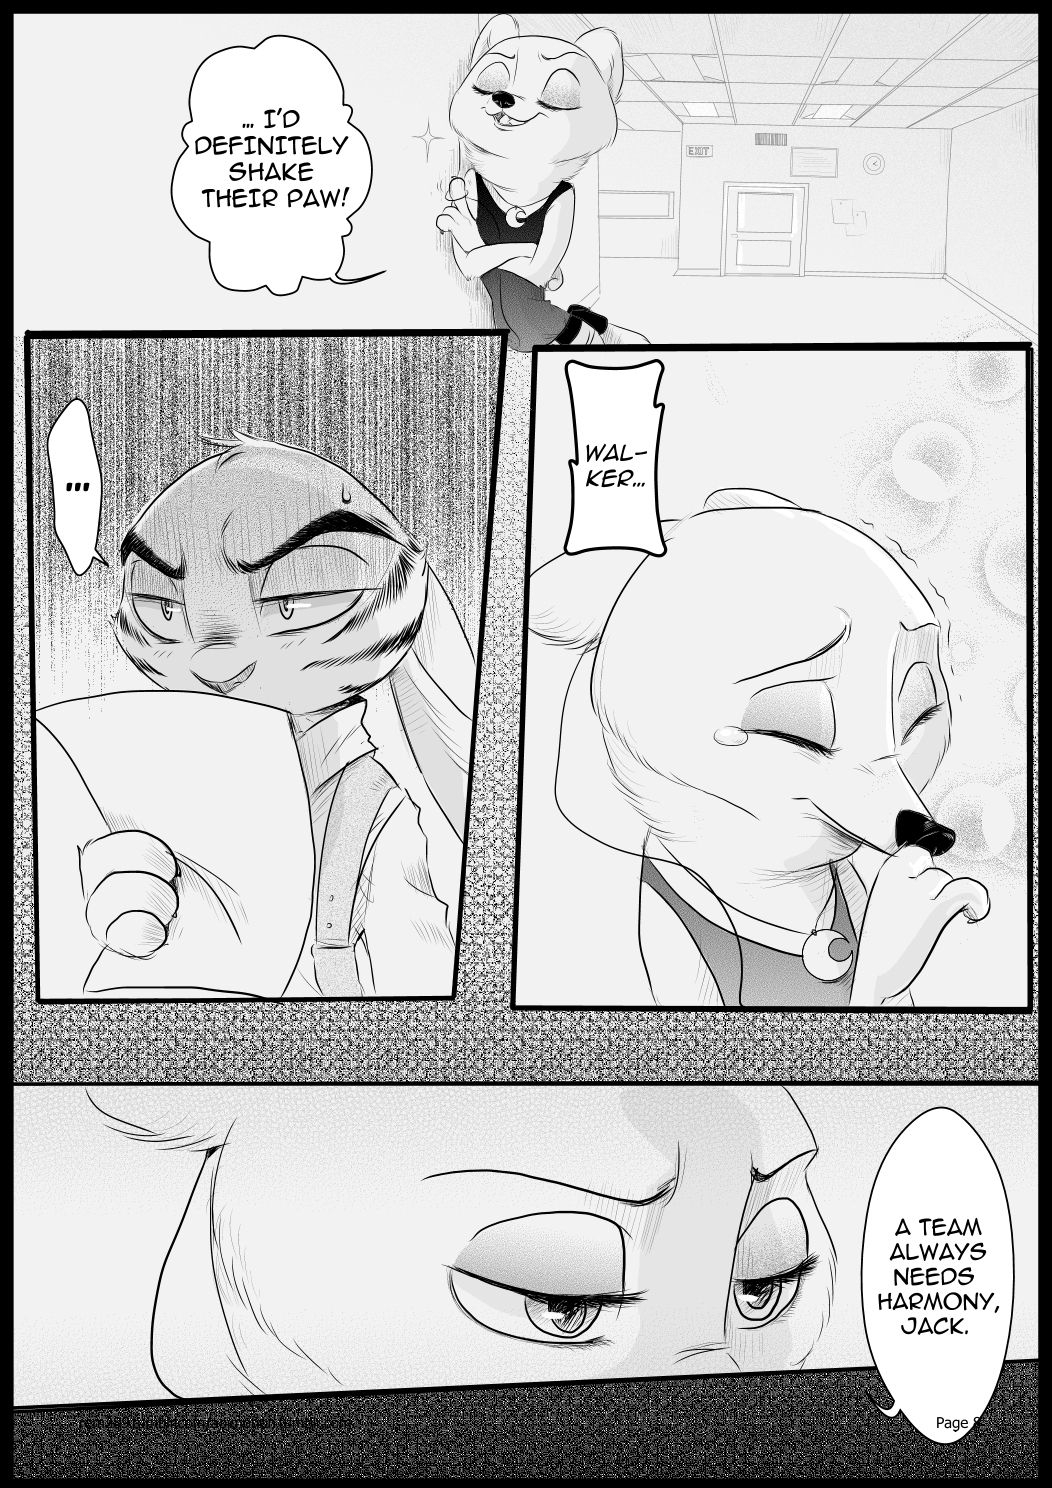 [Rem289] Black♡Jack V - The Good and The Bad (Zootopia) (English) 7